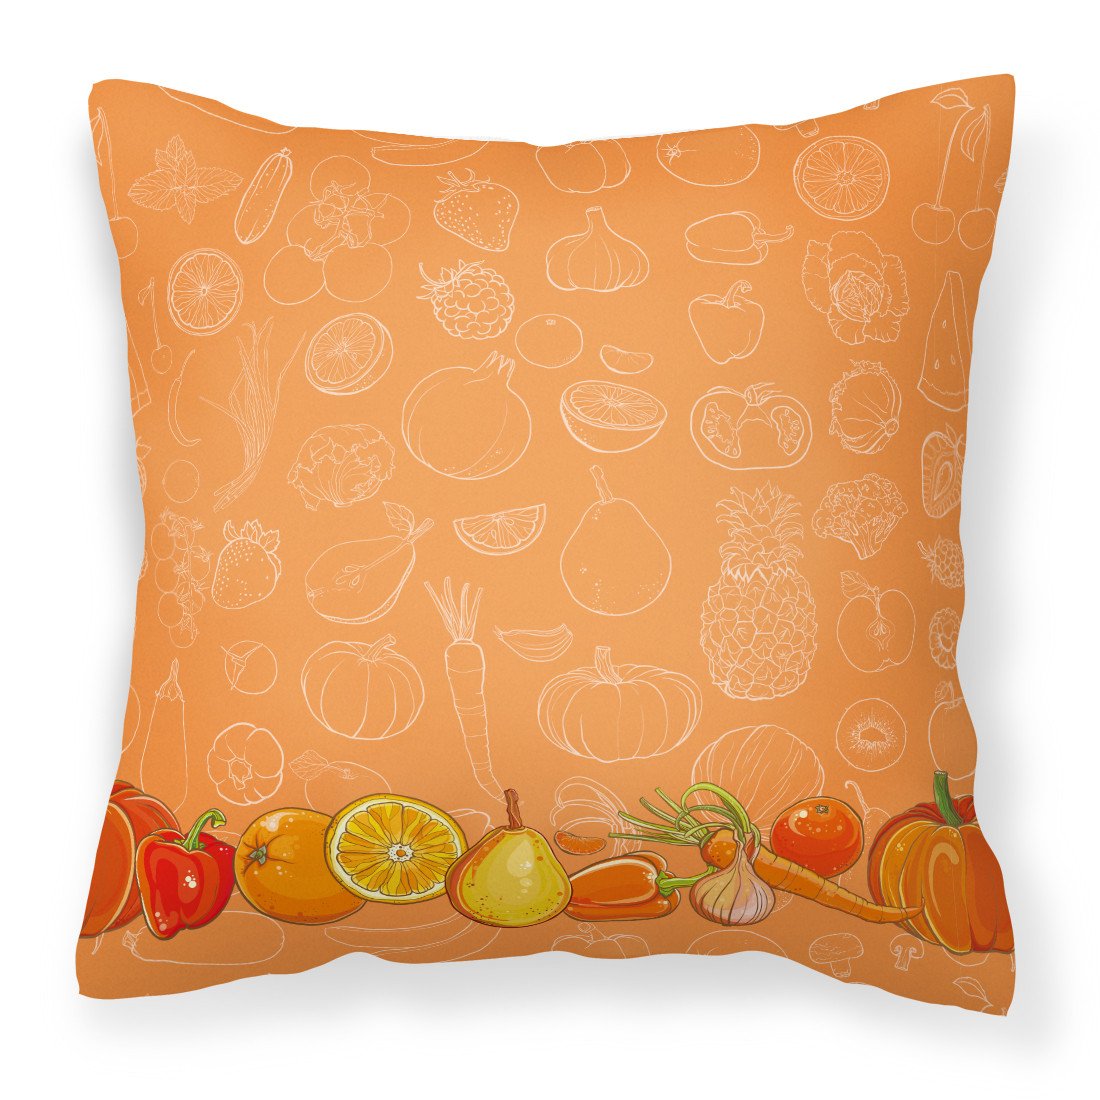 Fruits and Vegetables in Orange Fabric Decorative Pillow BB5131PW1818 by Caroline's Treasures